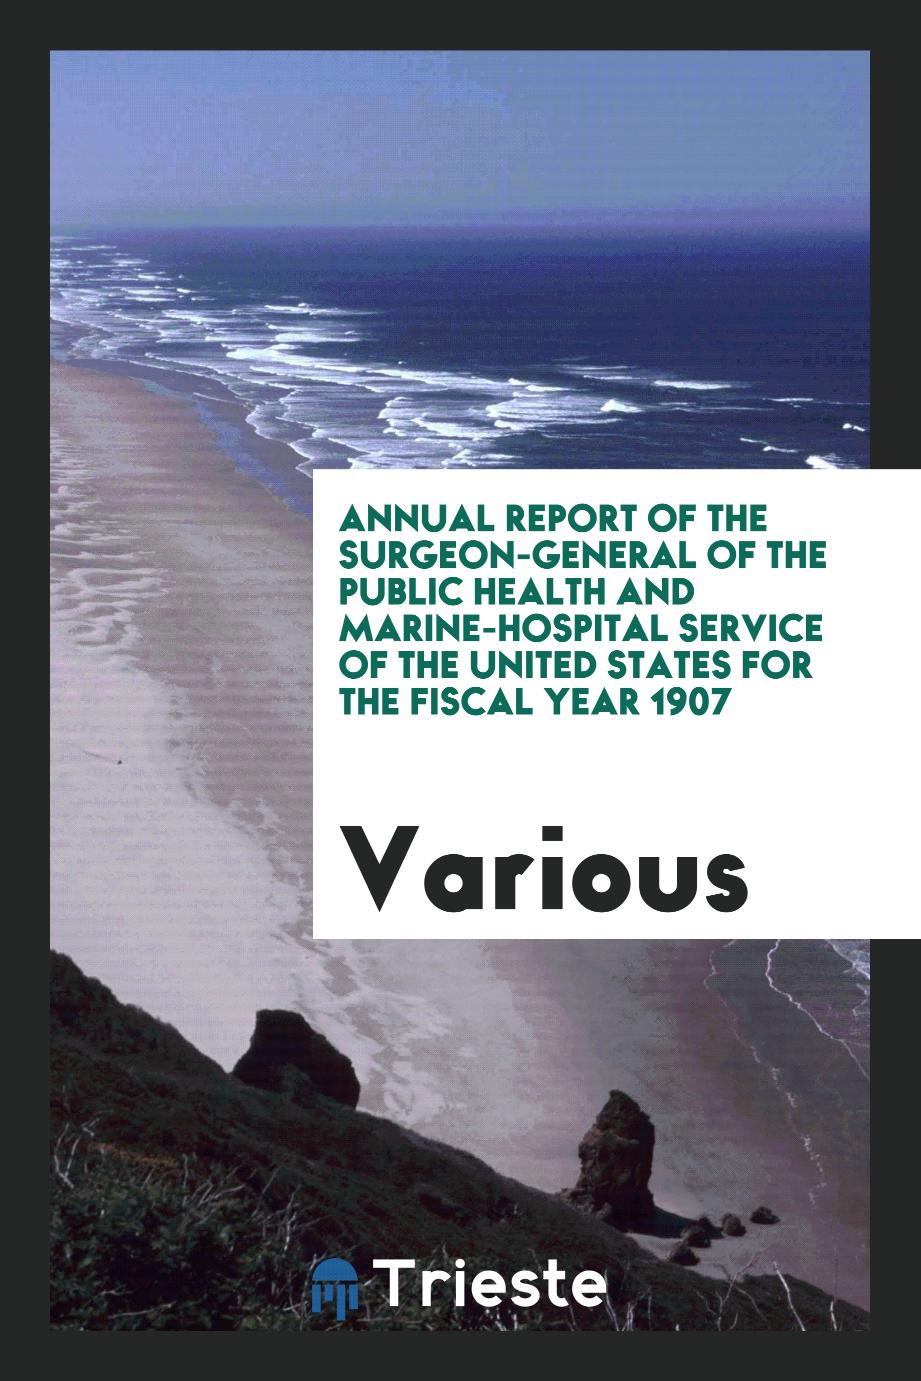 Annual Report of the Surgeon-General of the Public Health and Marine-Hospital Service of the United States for the Fiscal Year 1907